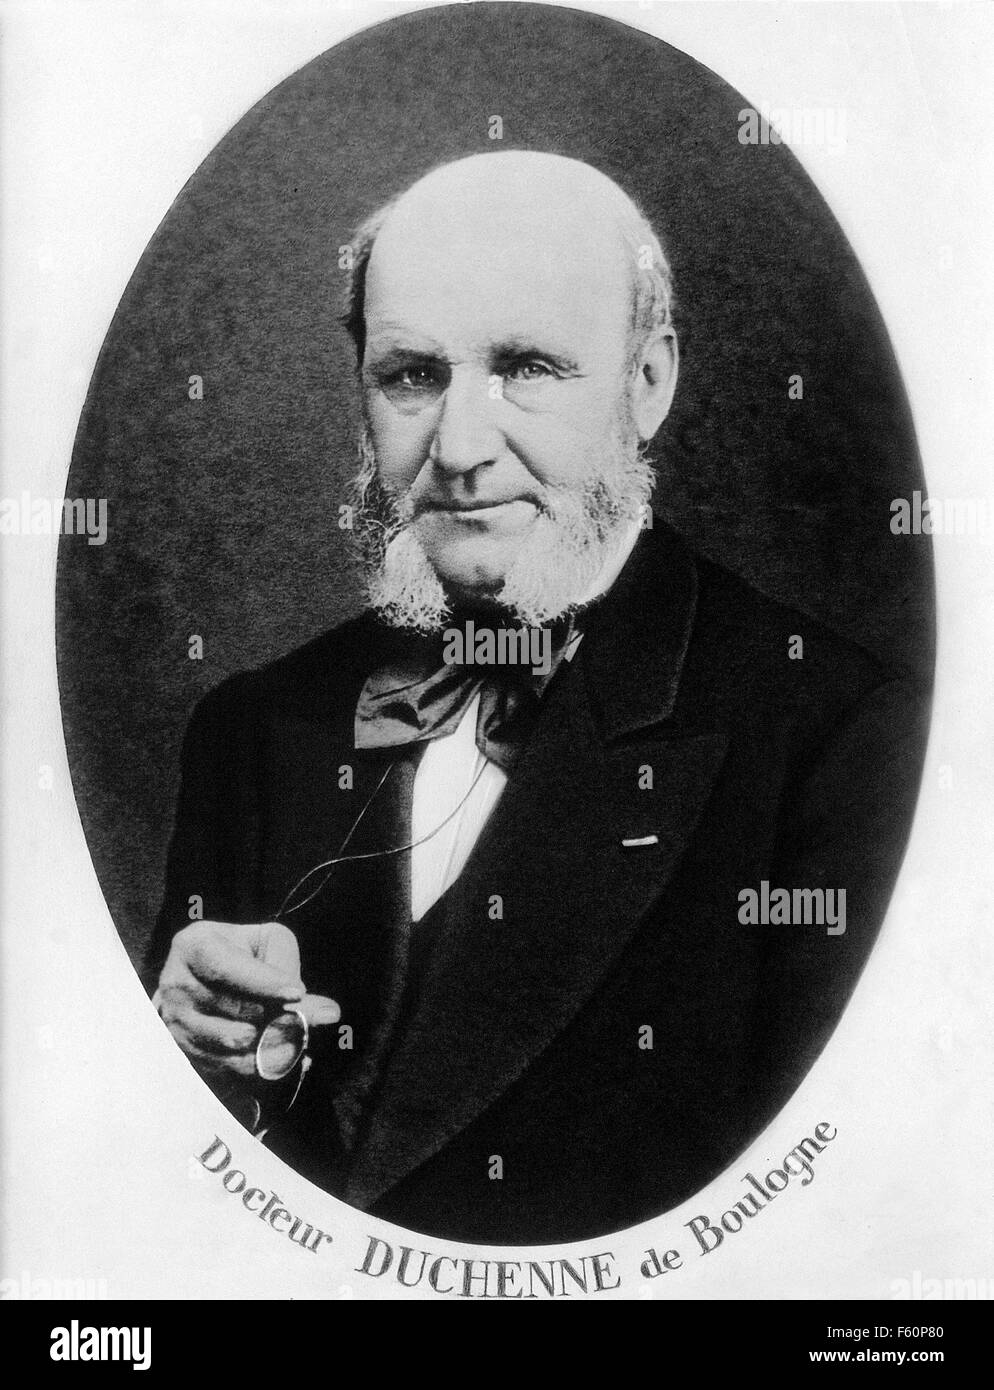 GUILLAUME DUCHENNE (1806-1875) French physician who worked on neurology, about 1860 Stock Photo